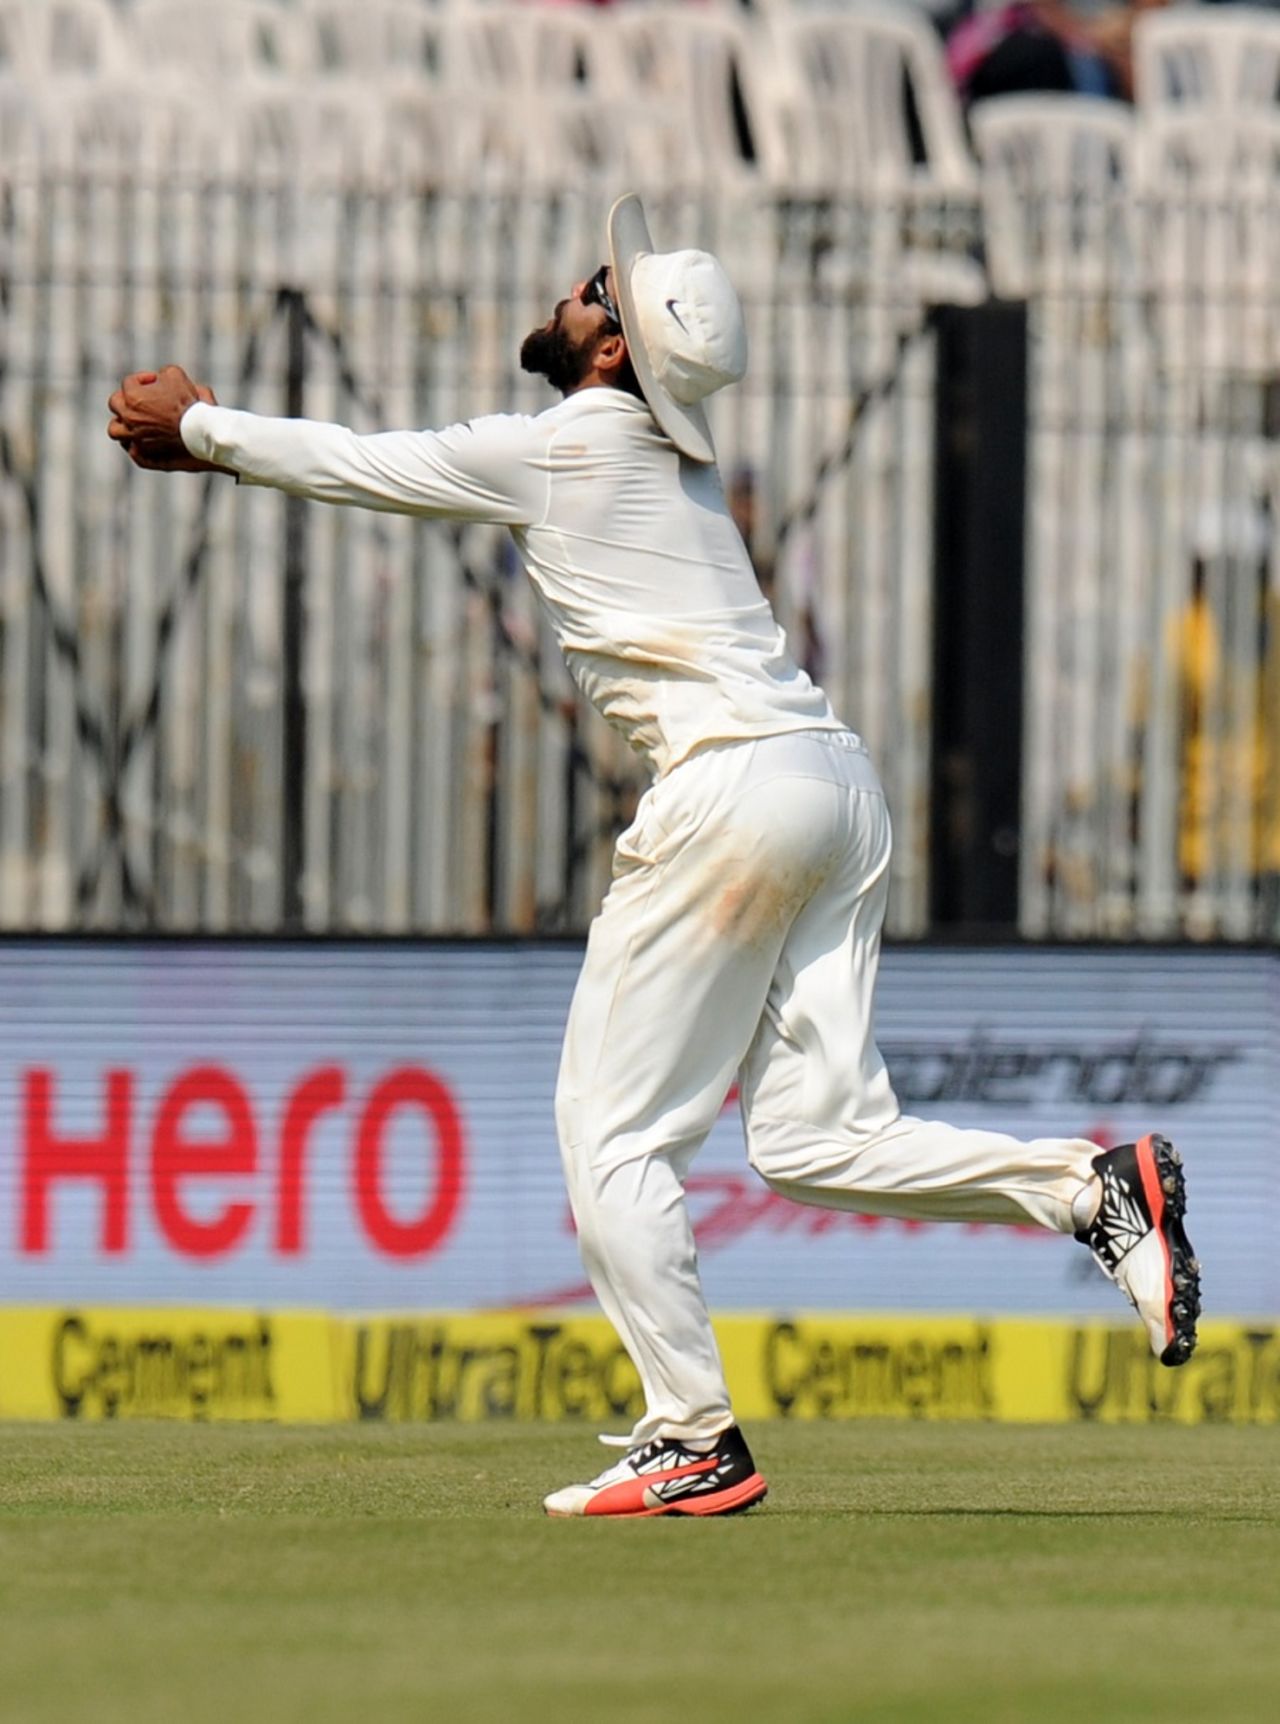 Ravindra Jadeja holds on to a difficult catch to remove Jonny Bairstow, India v England, 5th Test, Chennai, 5th day, December 20, 2016